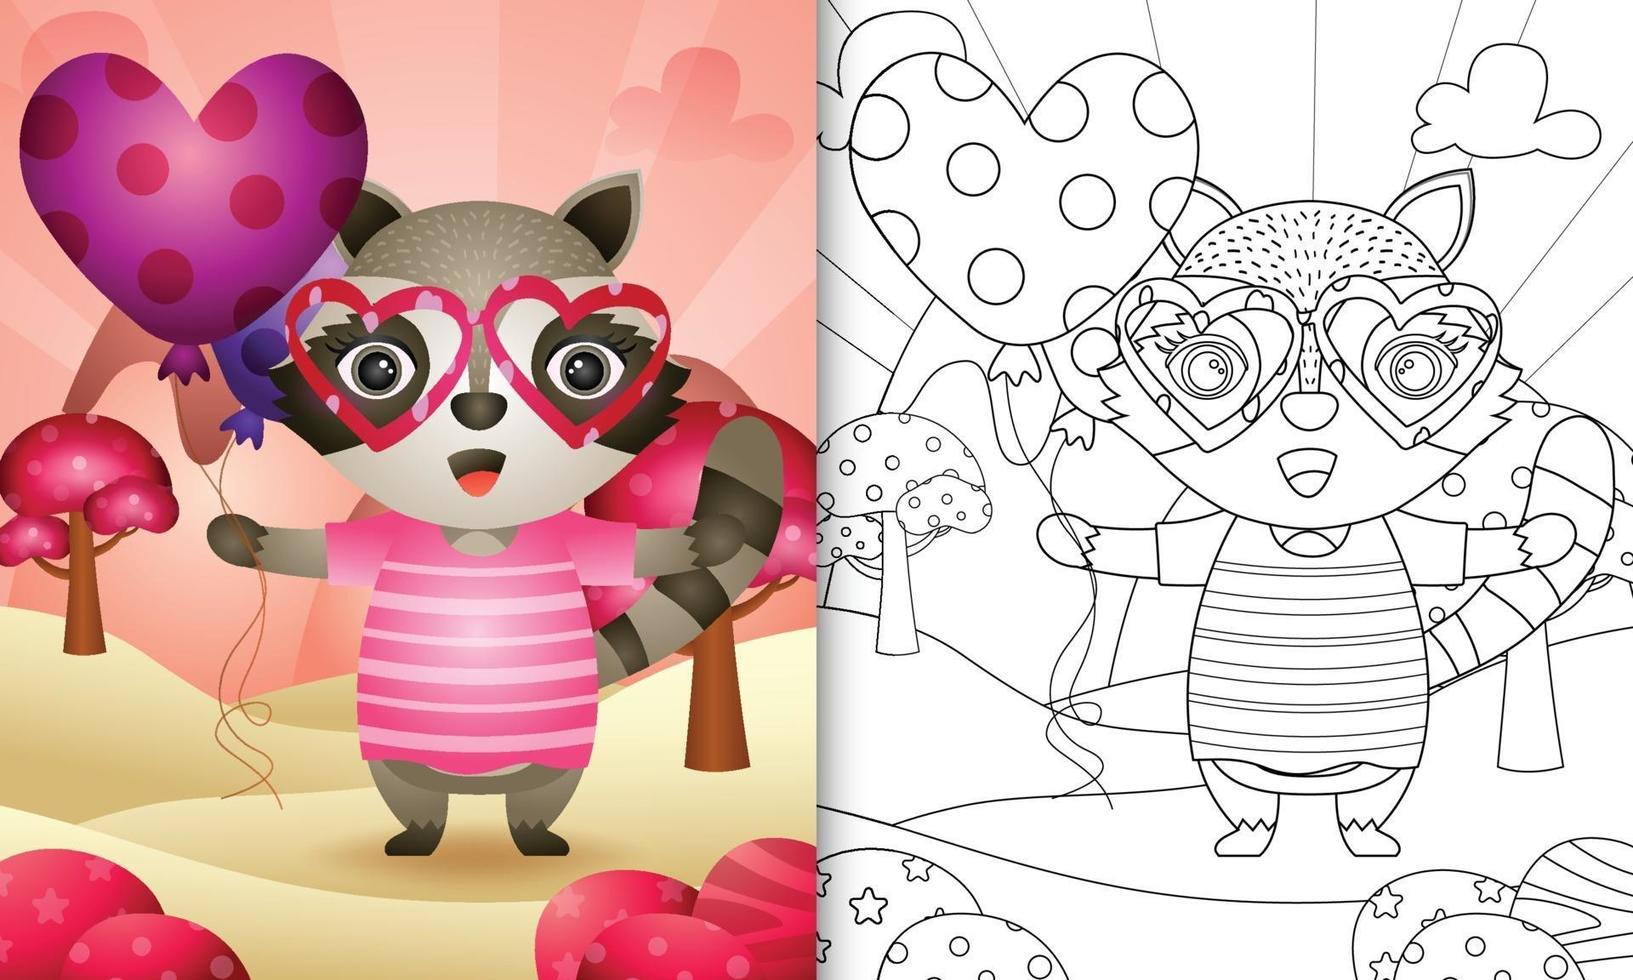 coloring book for kids with a cute raccoon holding balloon for valentine's day vector